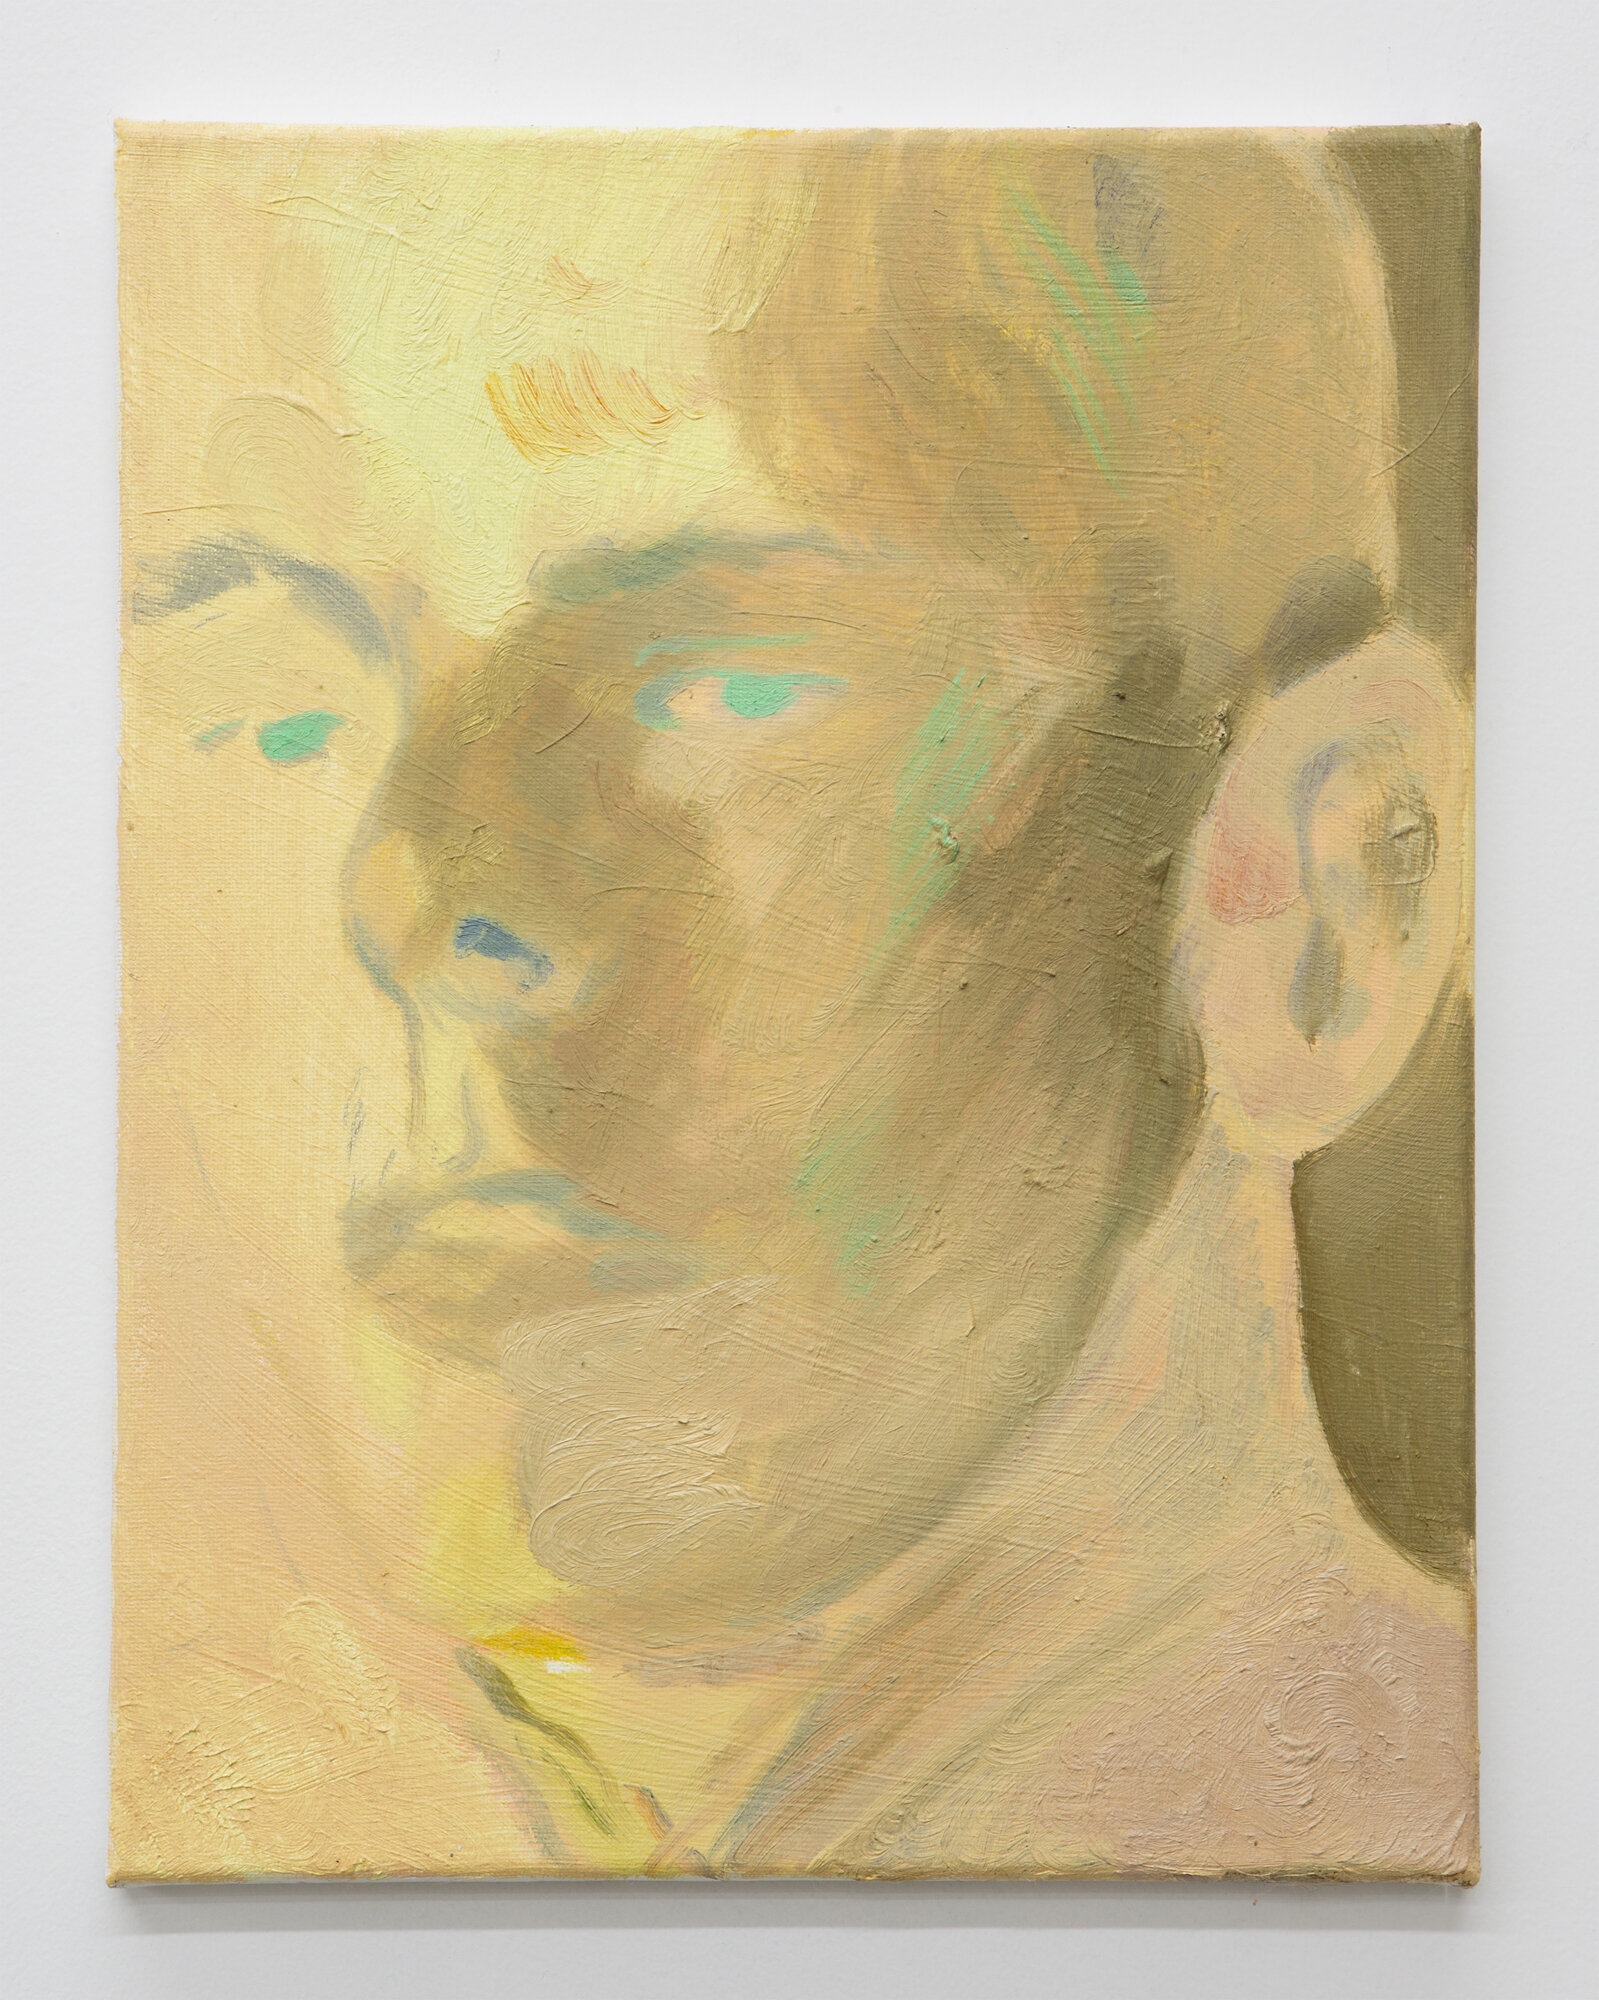  © Anthony Cudahy,  yellow gaze, 2021  Oil on canvas, 14 × 11 inches 